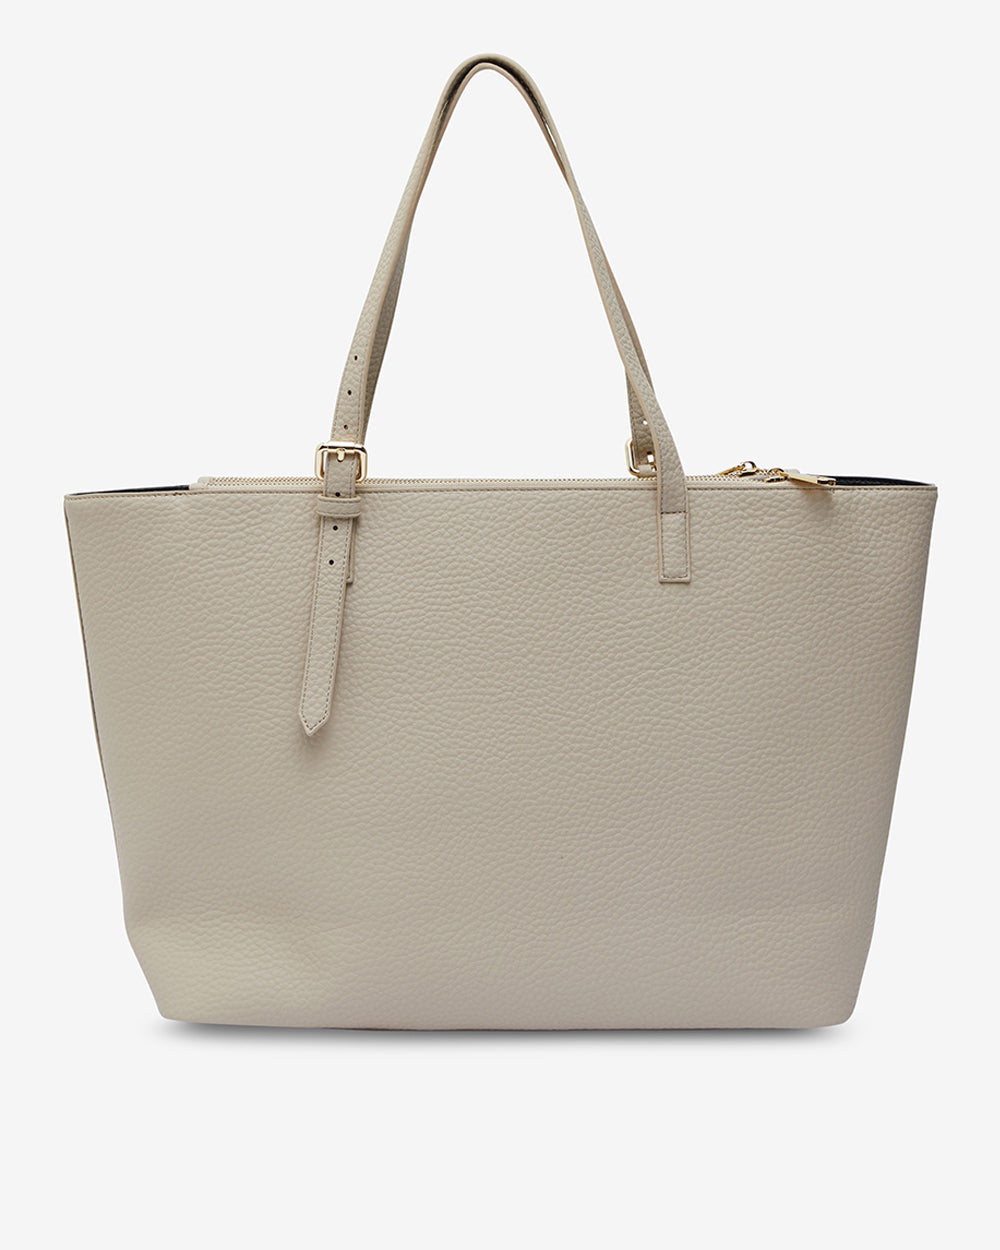 Carmine Tote - Oyster